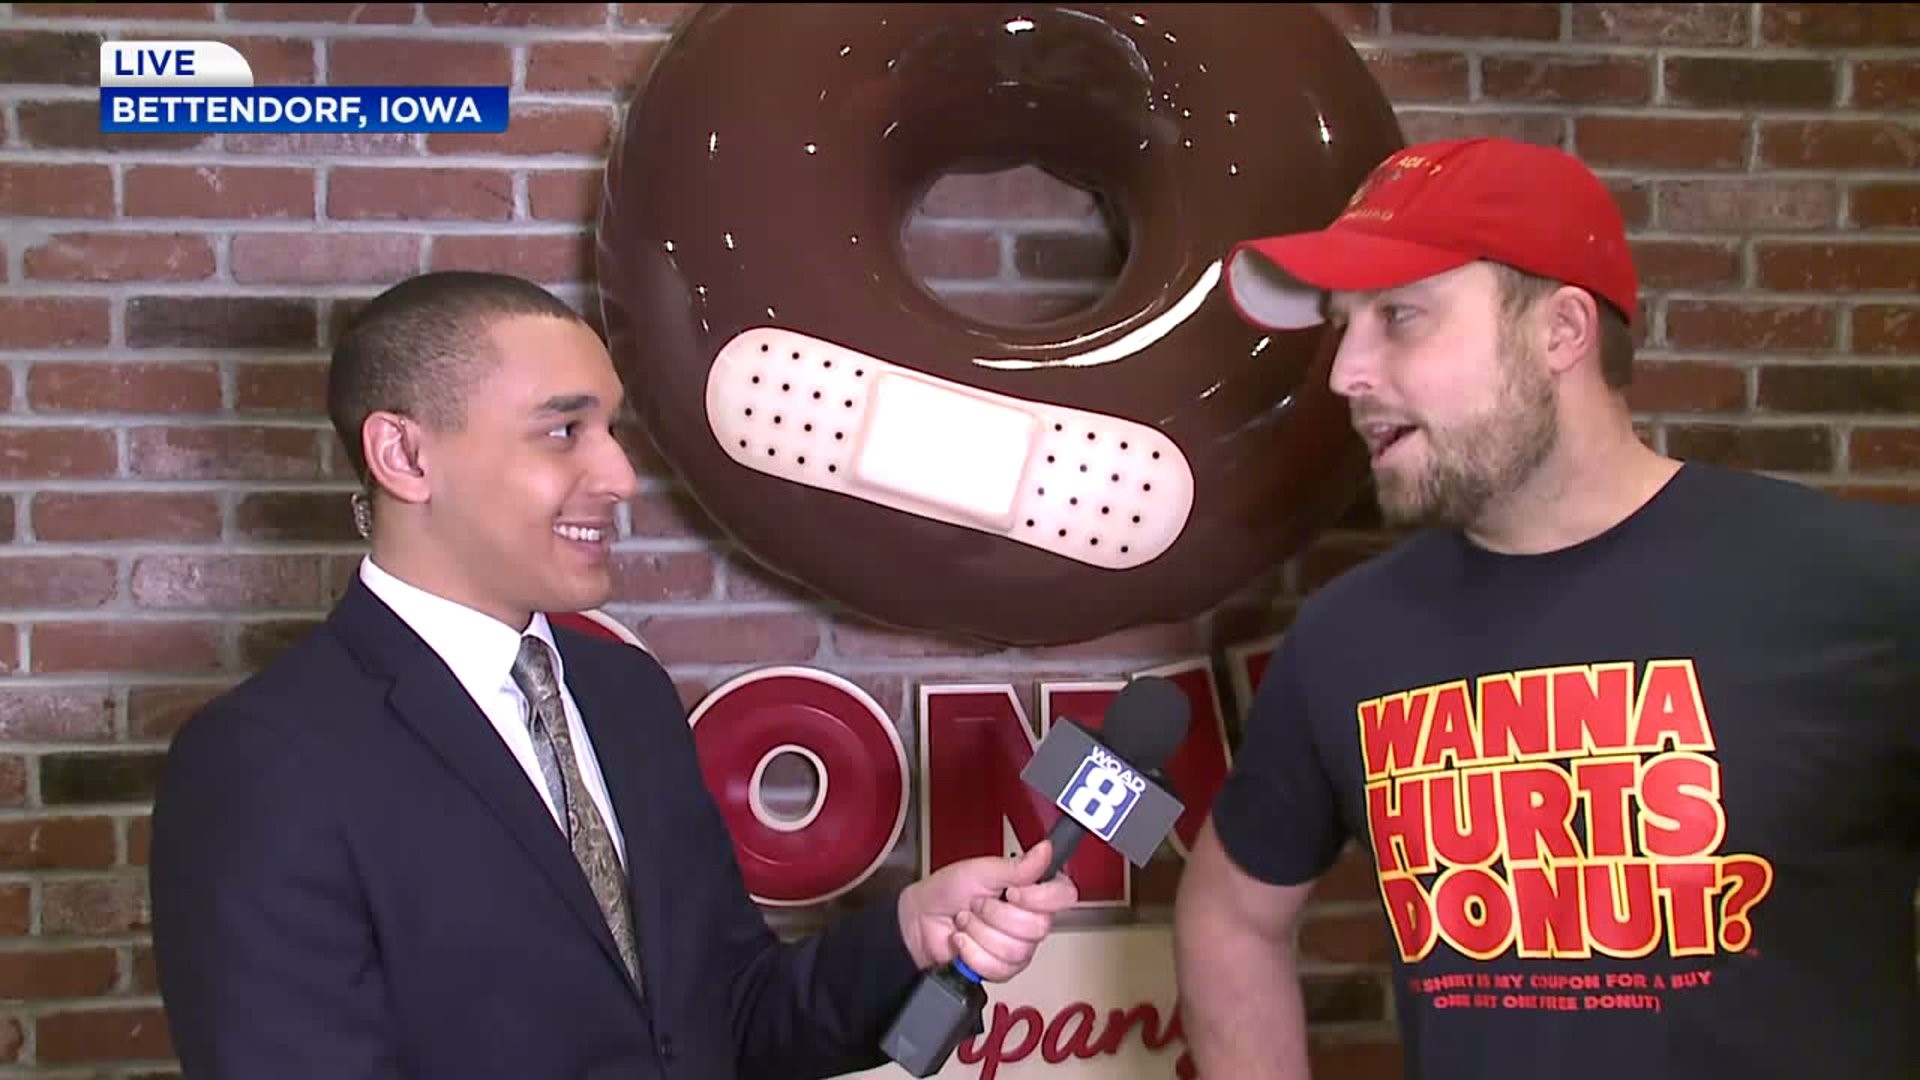 `The QC has always been big supporters,` co-owner excited about Hurts Donuts in Bettendorf